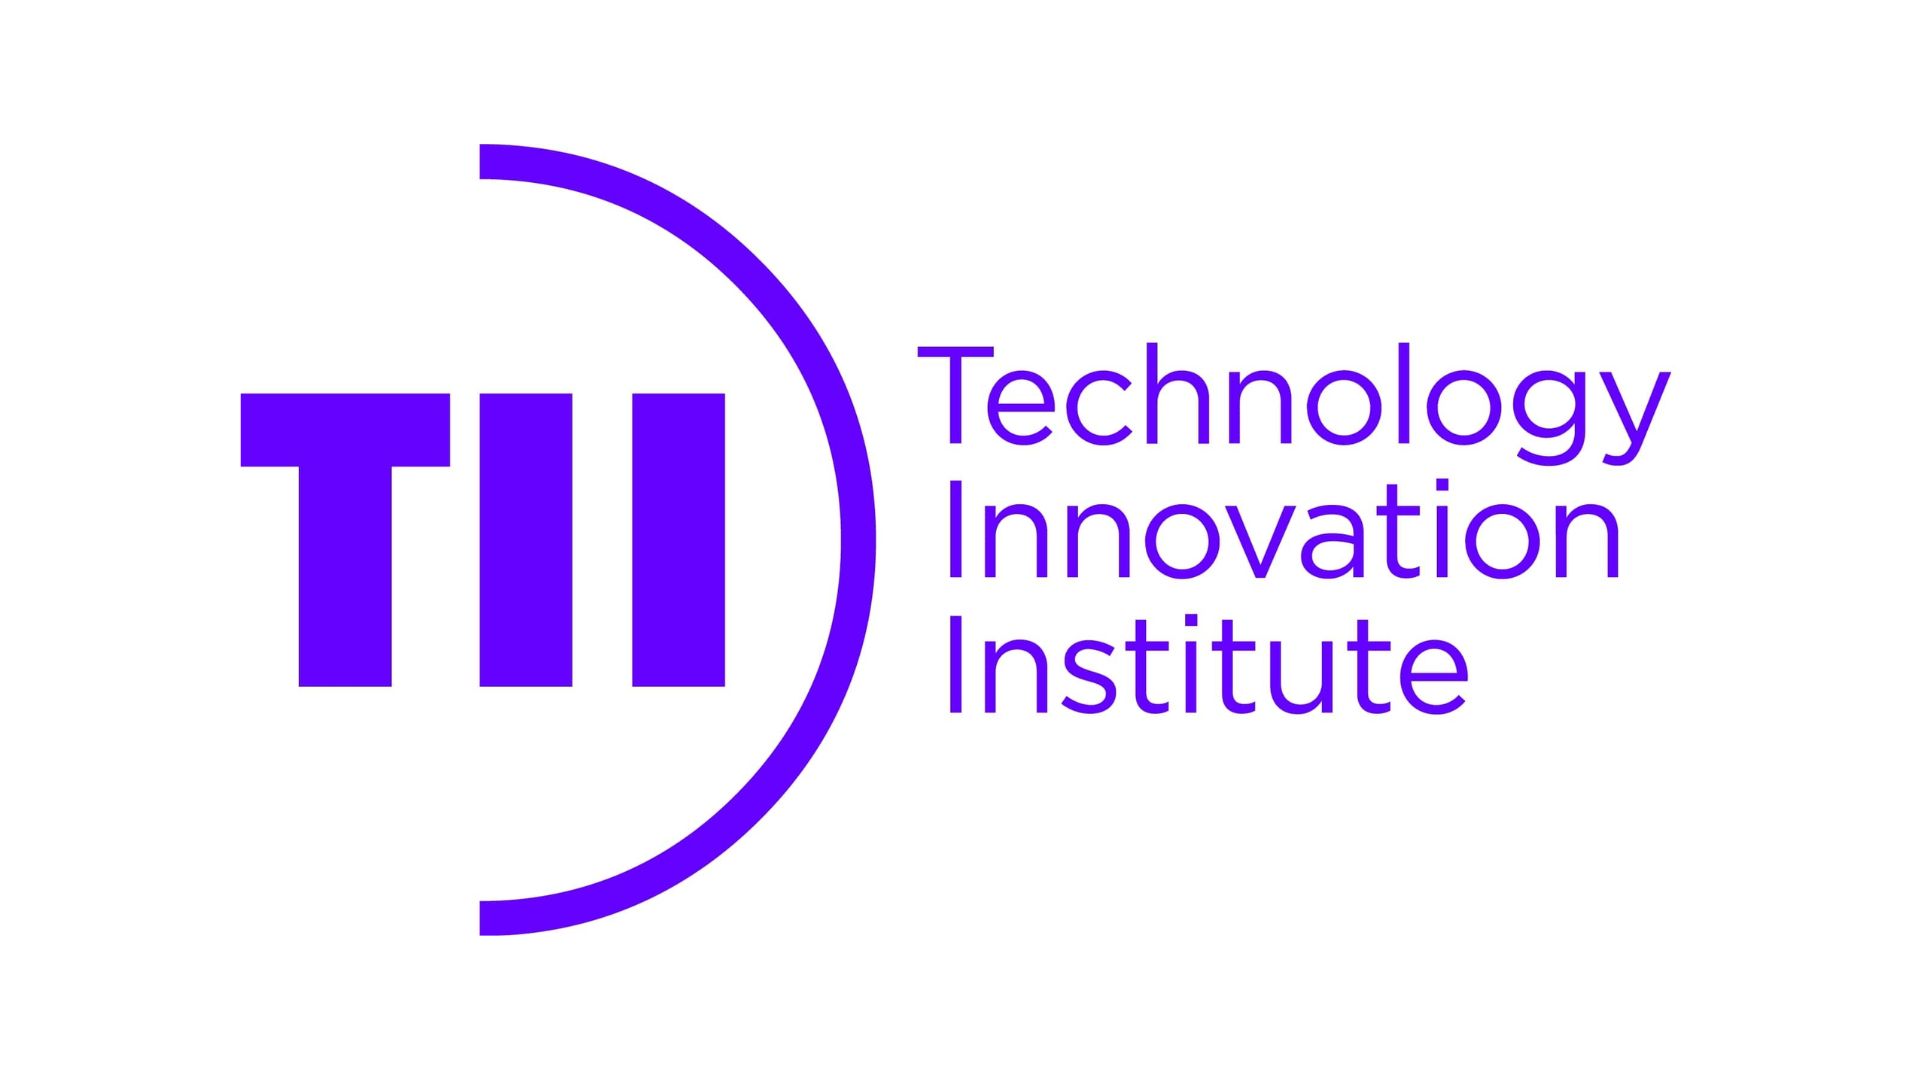 The Technology Innovation Institute (TII) joins the Light Communication Alliance